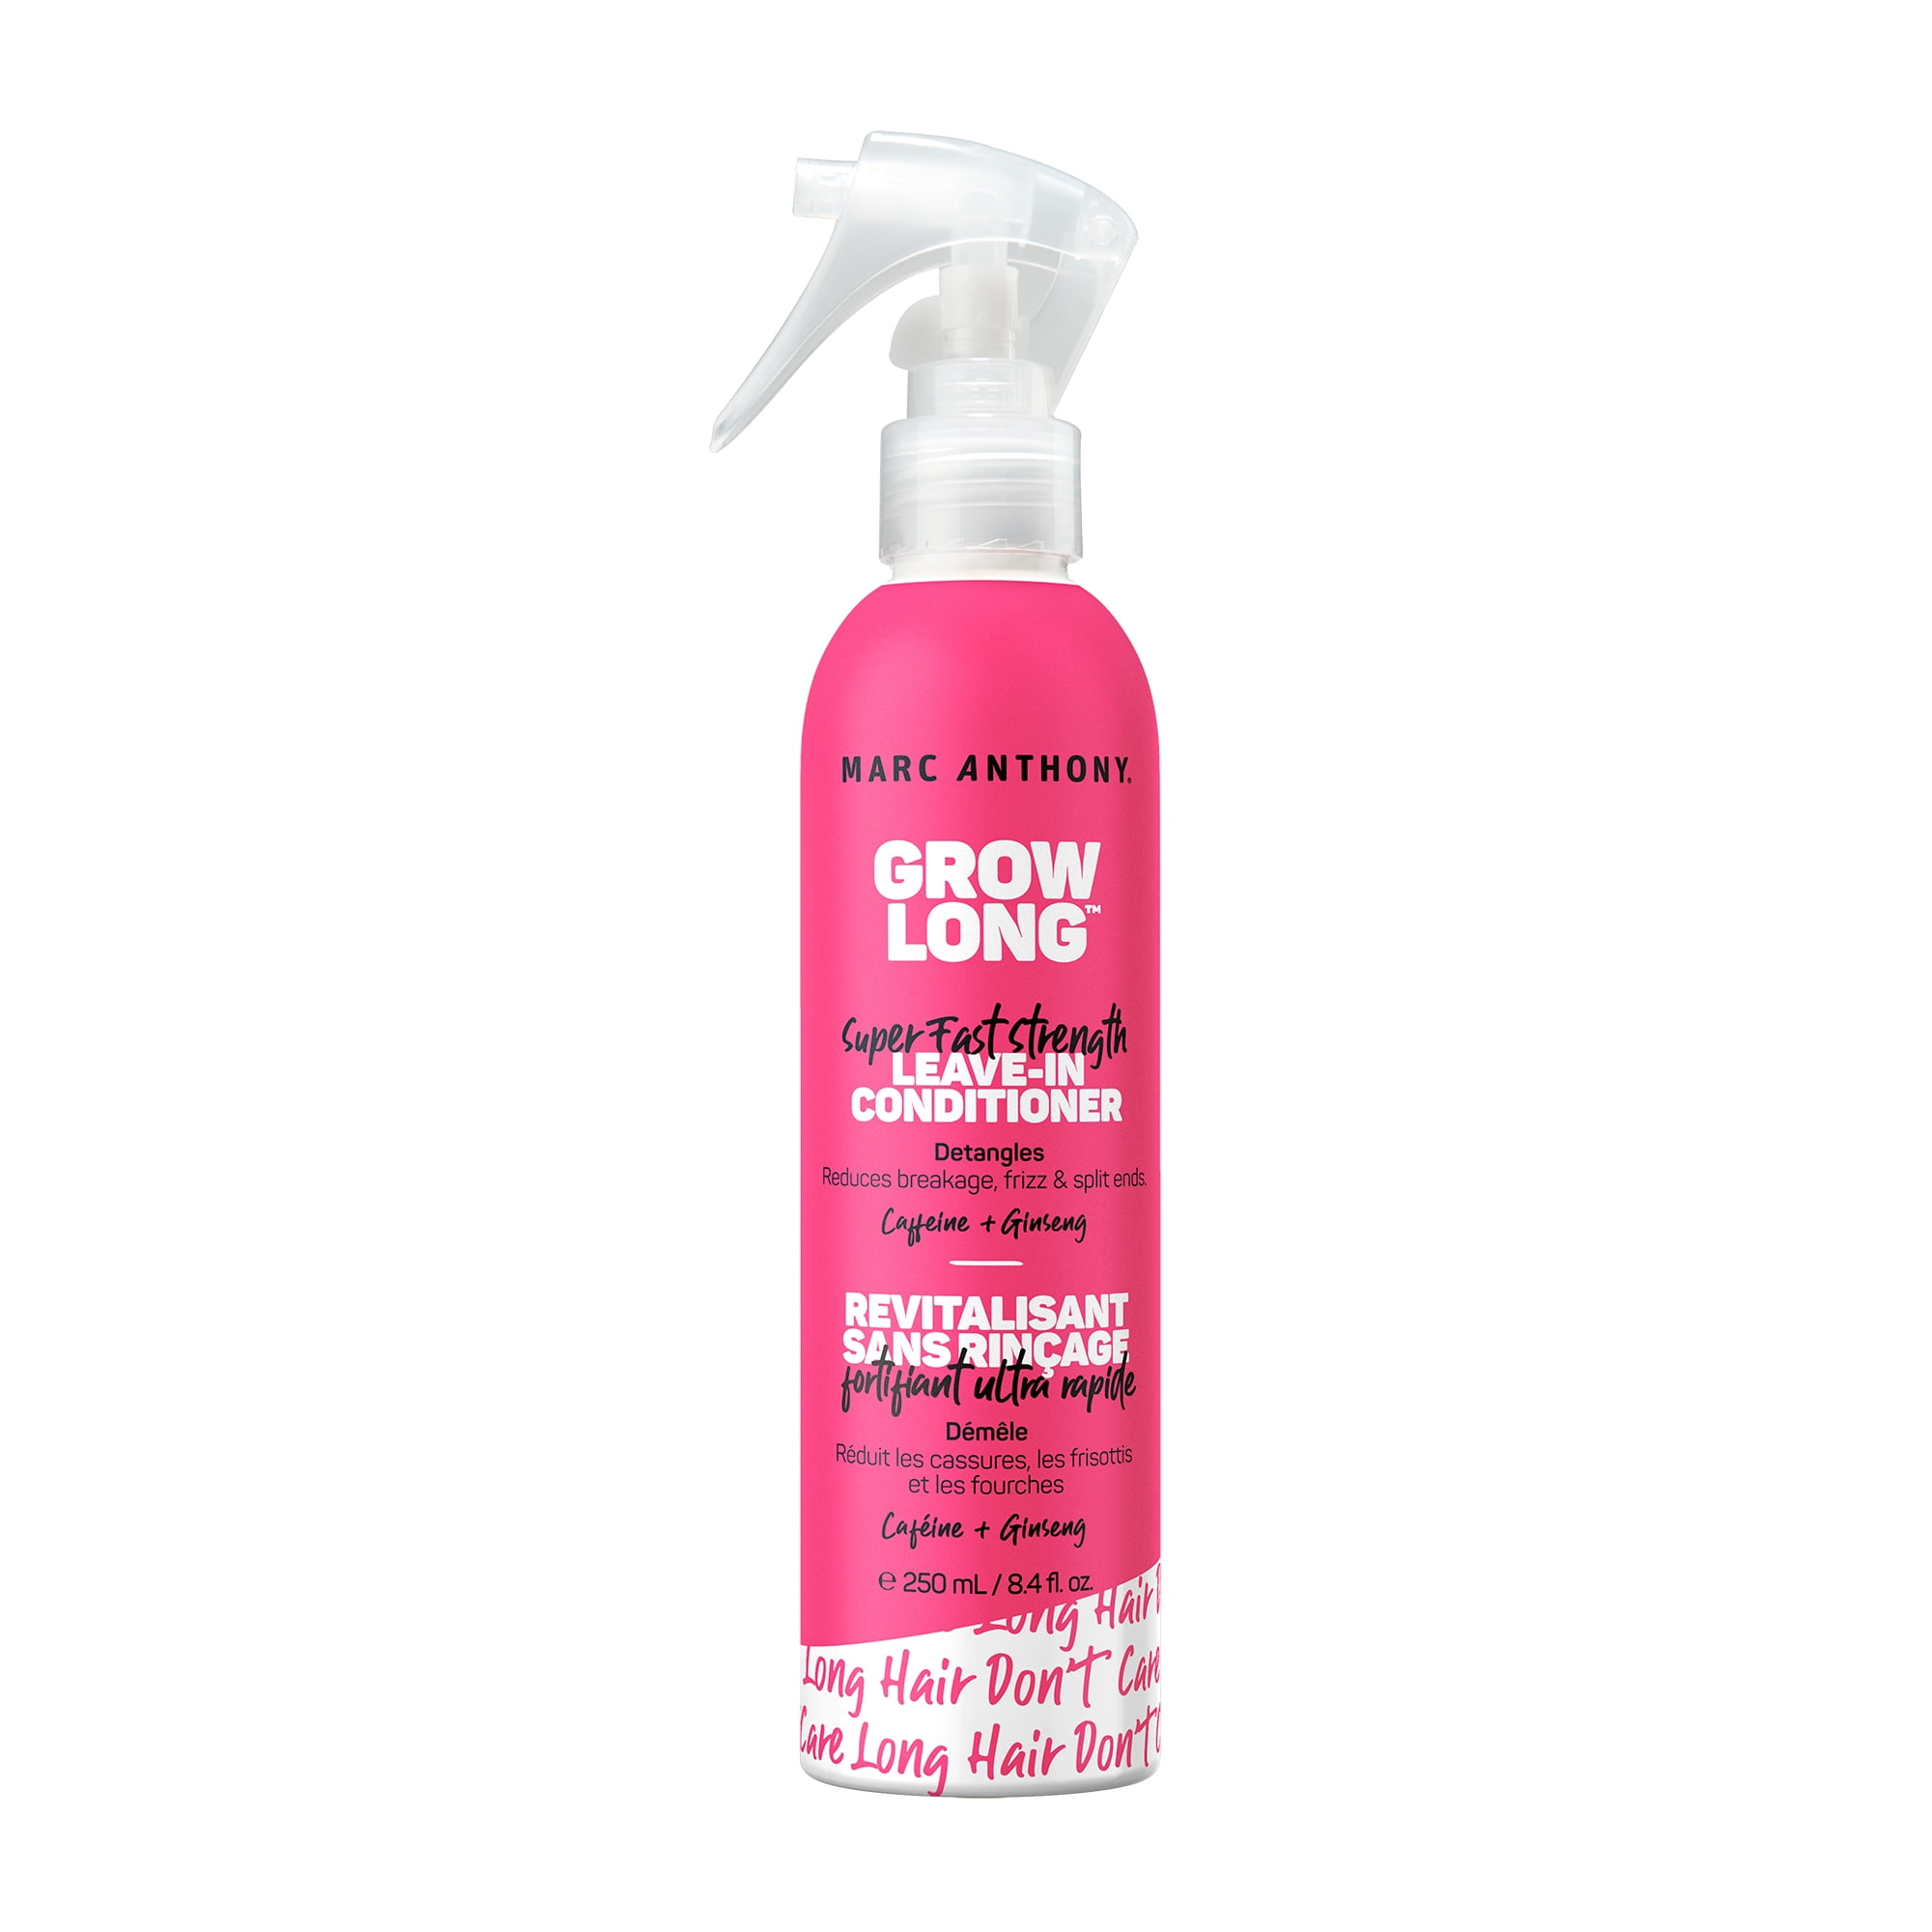 Marc Anthony Grow Long Heat Protection & Detangling Leave-in Conditioner with Biotin & Vitamin E, 8.4 fl oz